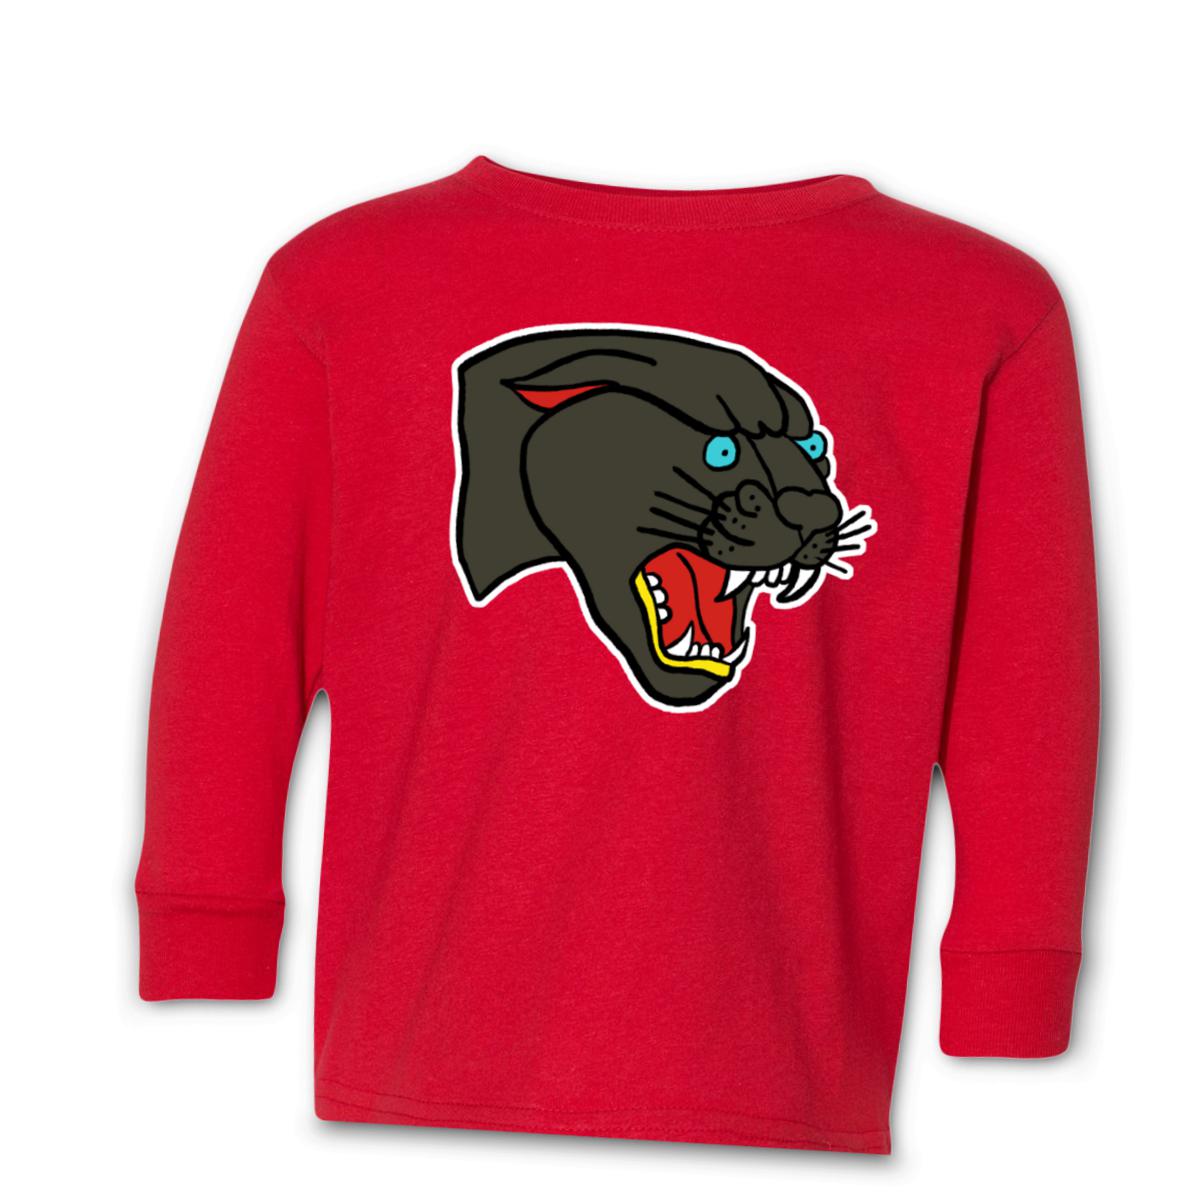 American Traditional Panther Toddler Long Sleeve Tee 56T red